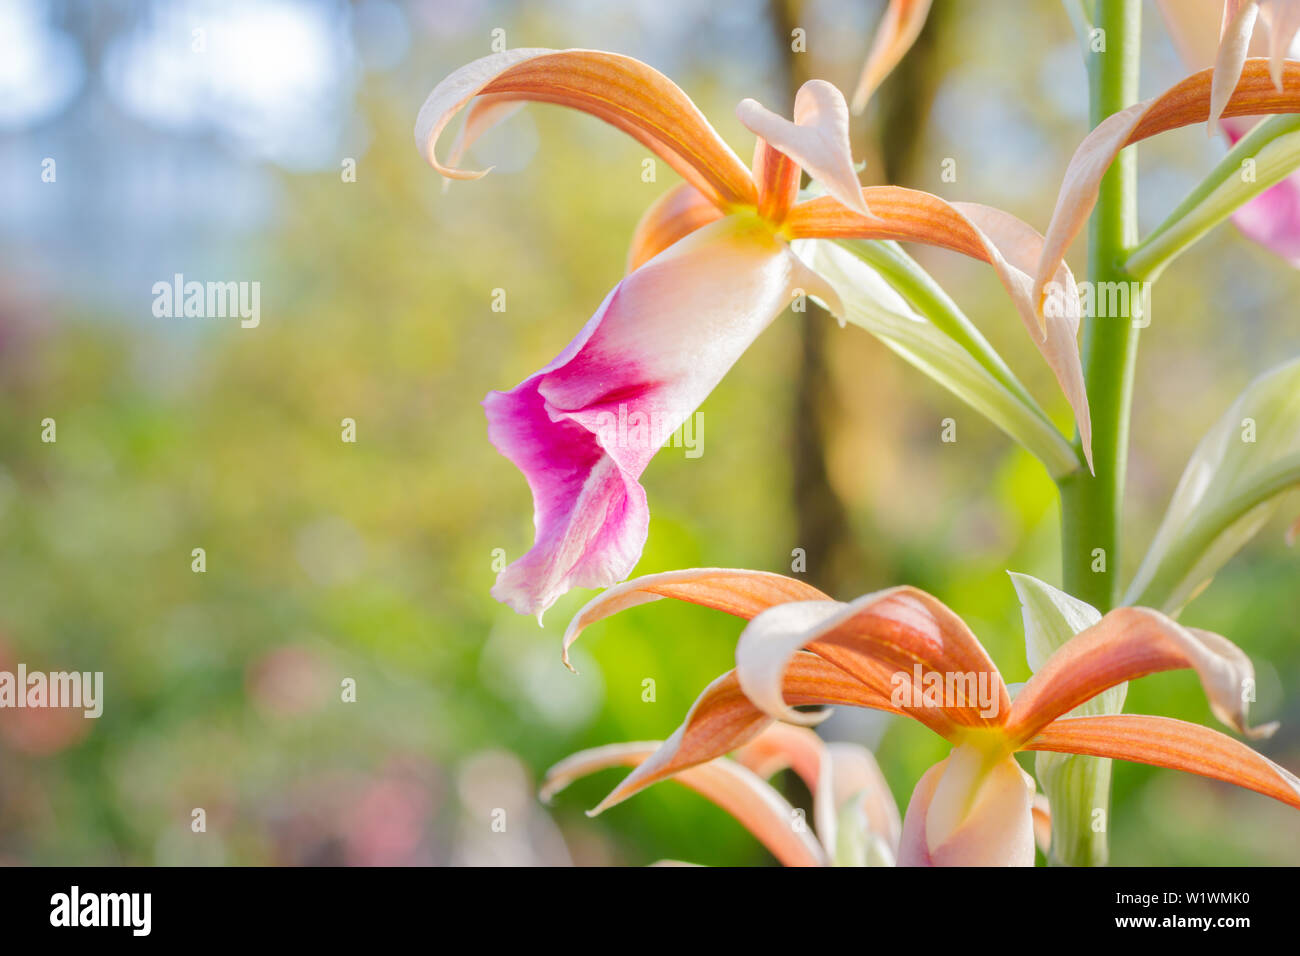 Beautiful purple and white orchid blooming close up view (Phaius tankervilleae) nature background. Stock Photo